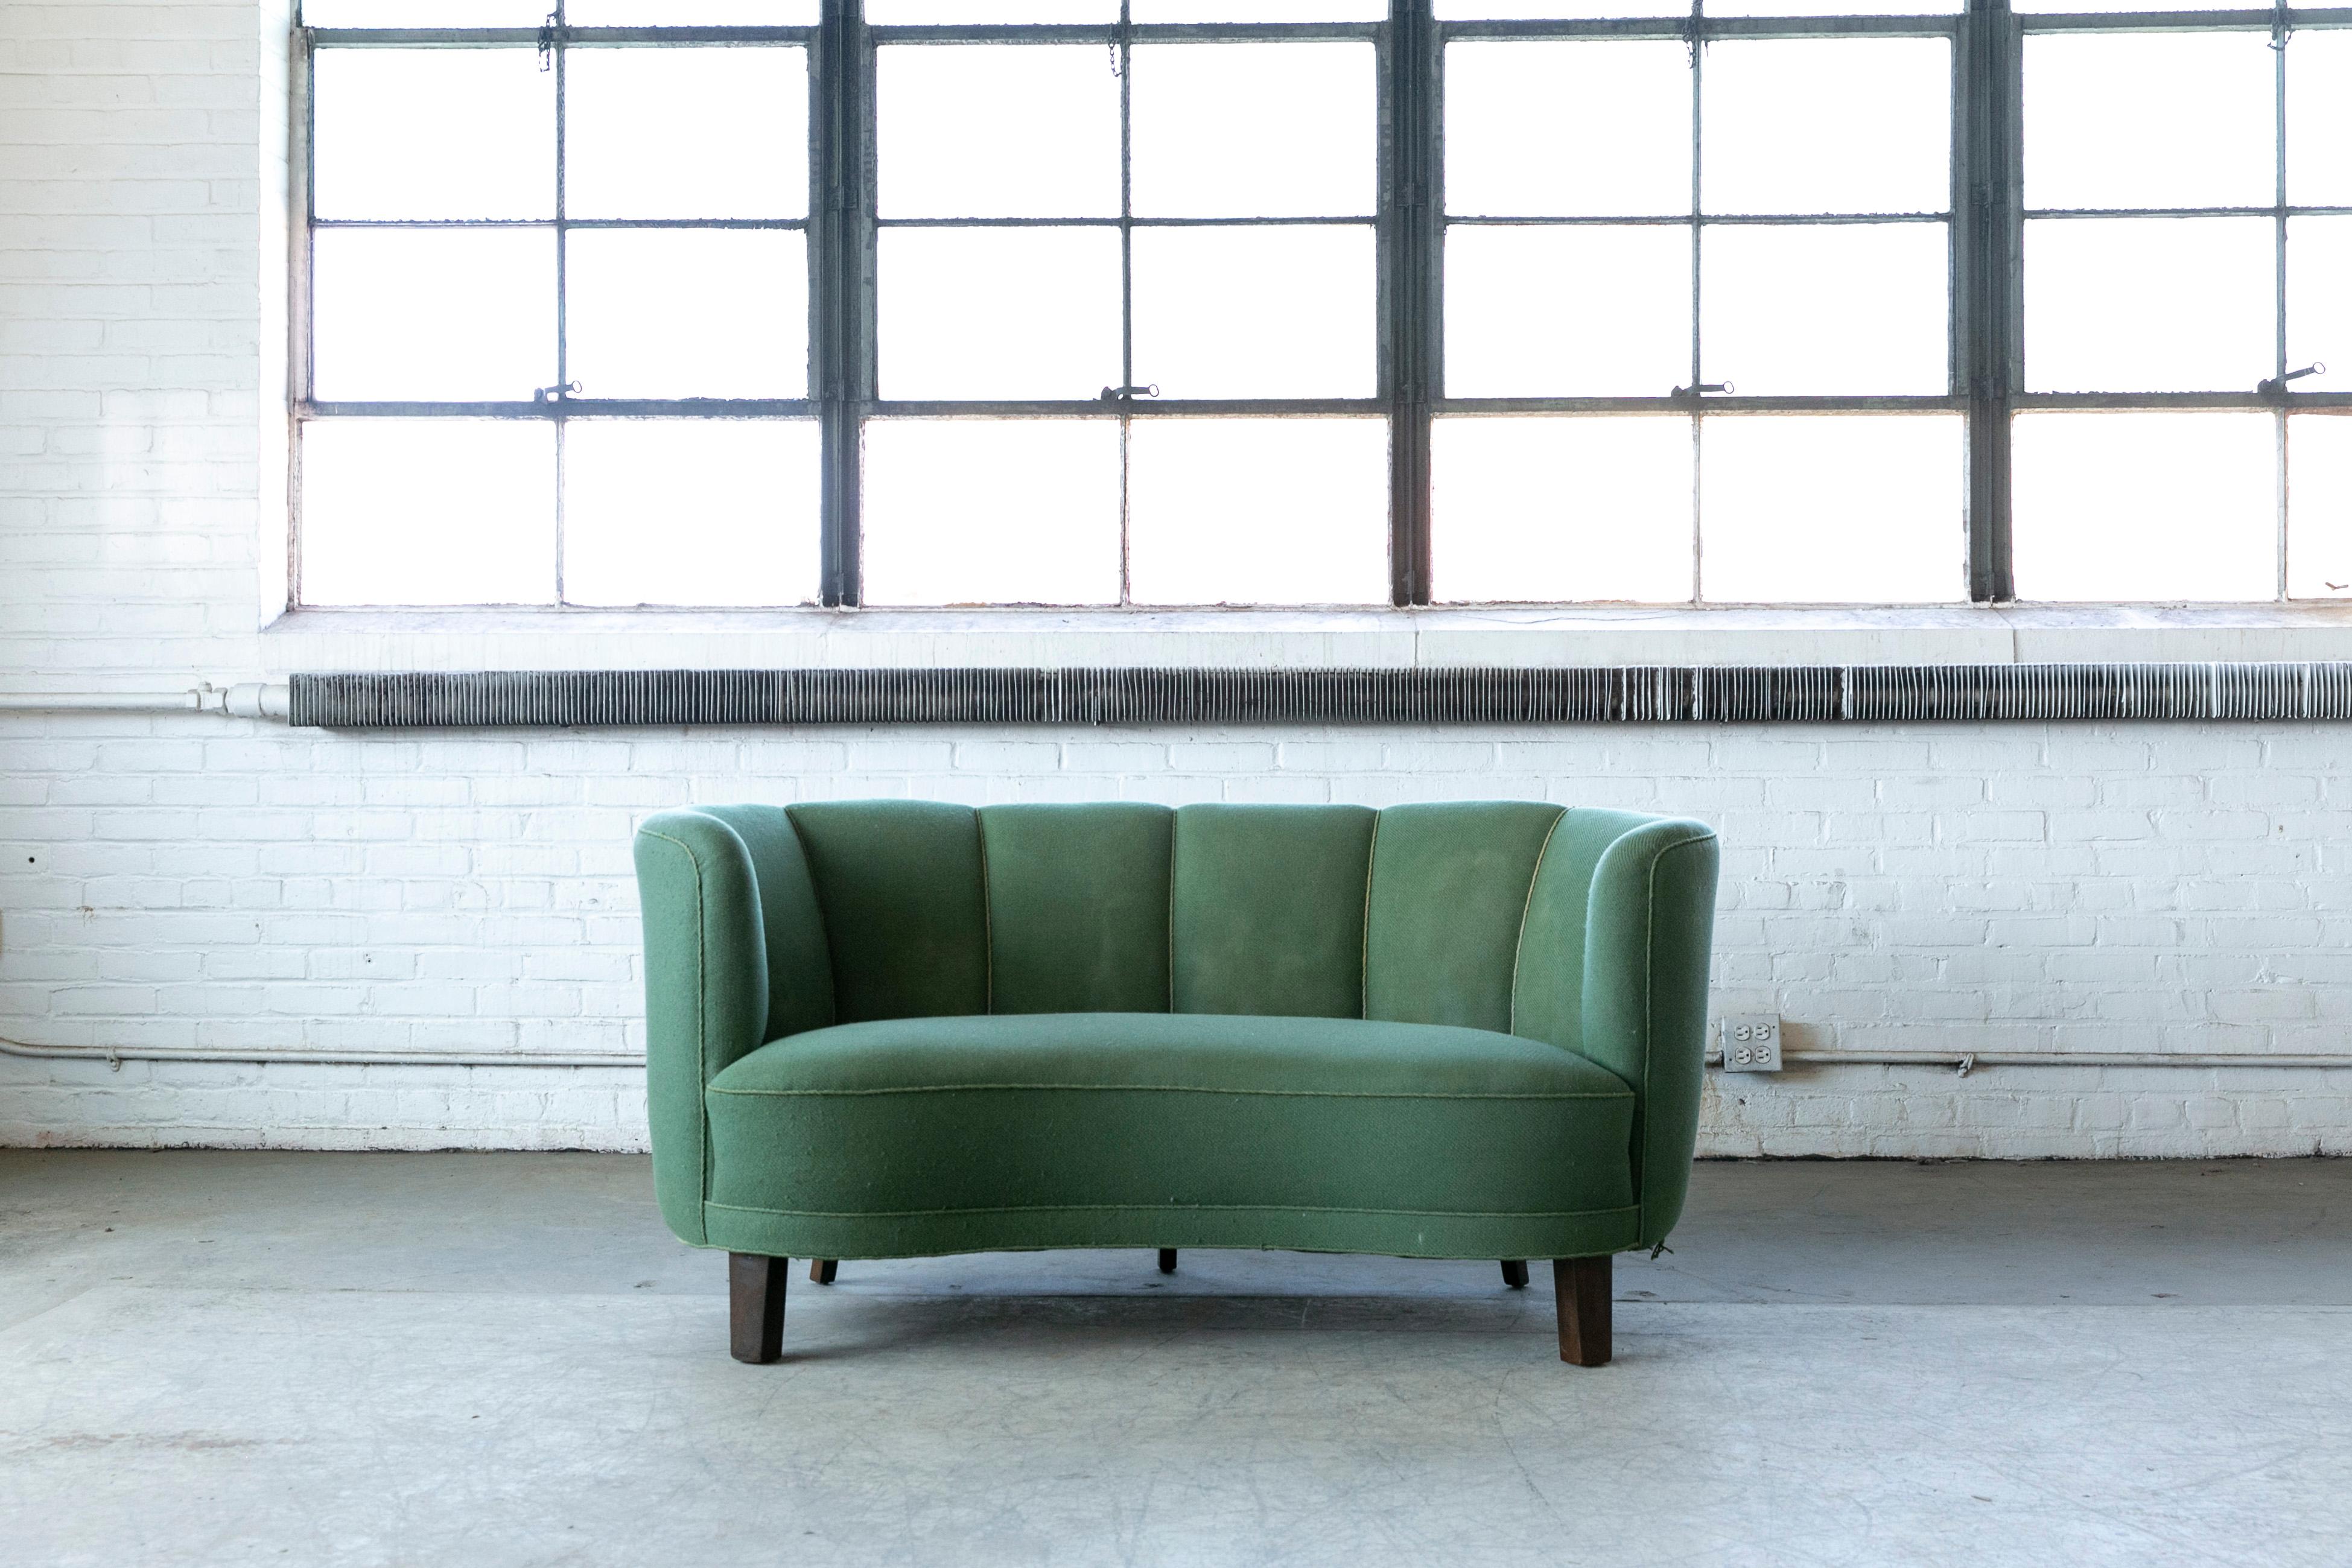 Mid-20th Century Danish 1940s Channel Back Banana Form Curved Sofa or Loveseat in Green Wool